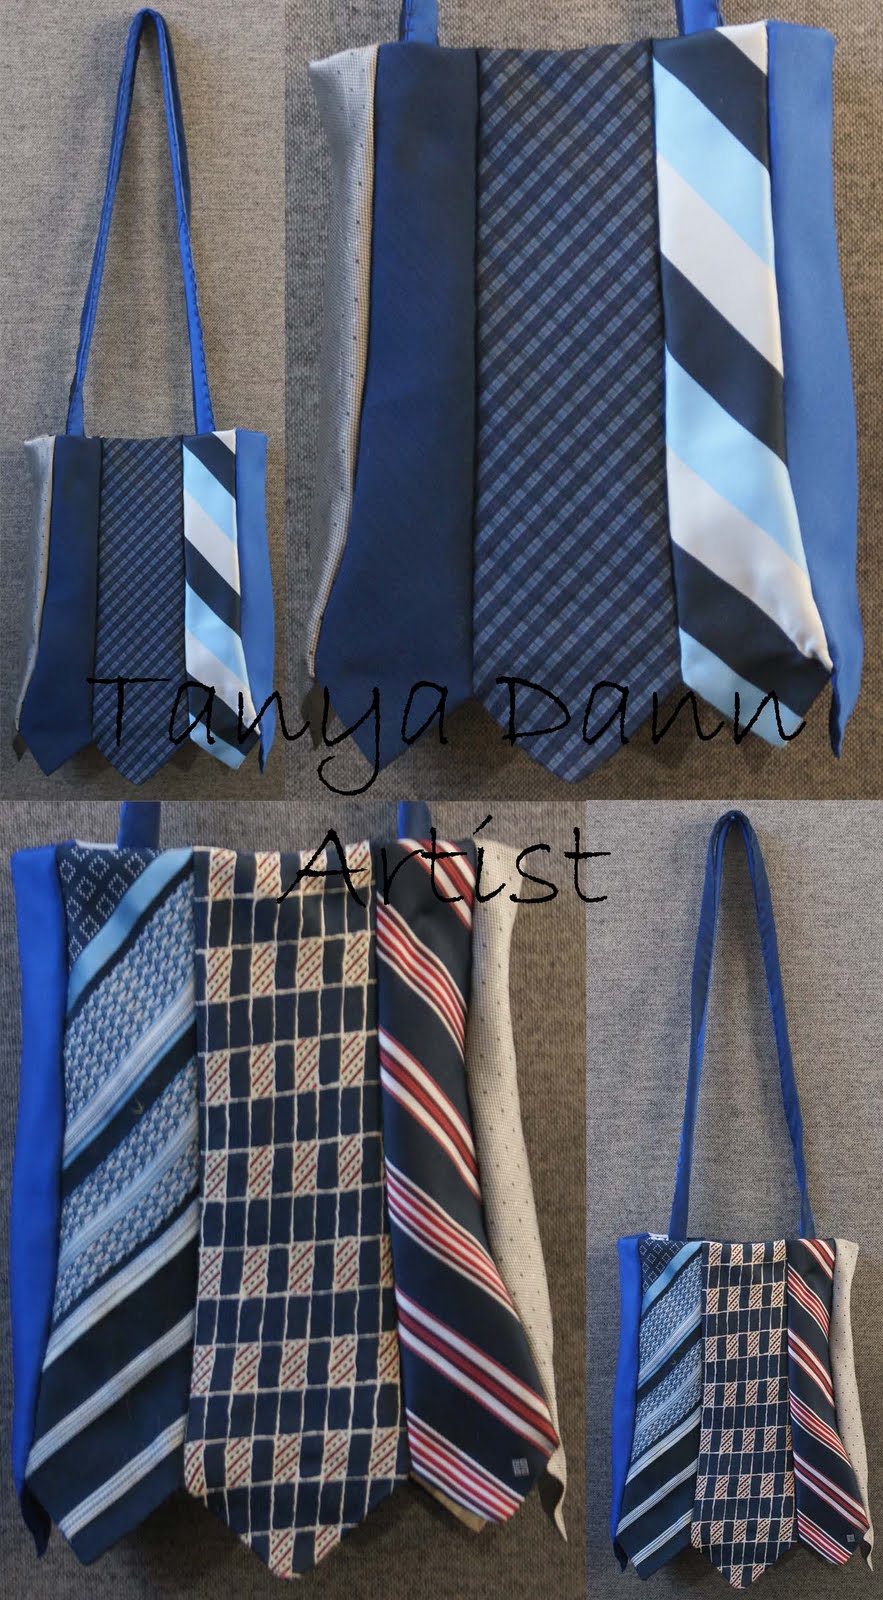 Art by Tanya Dann: Latest tie bags - one off original wearable art pieces